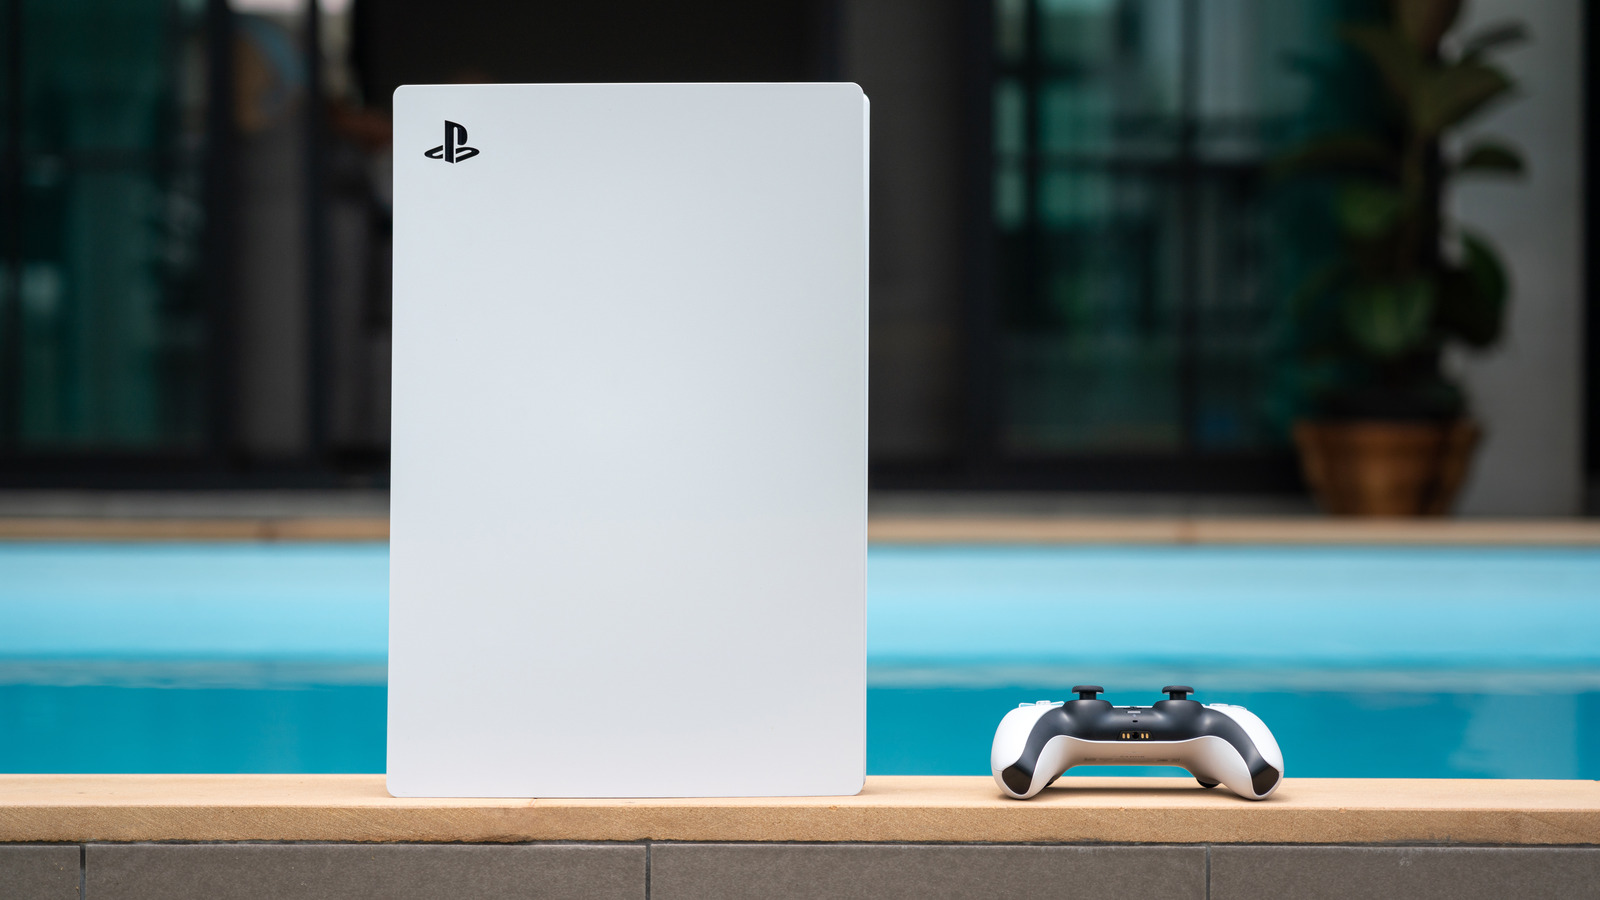 PlayStation 5: Sony gives first look at new PS5 console and games